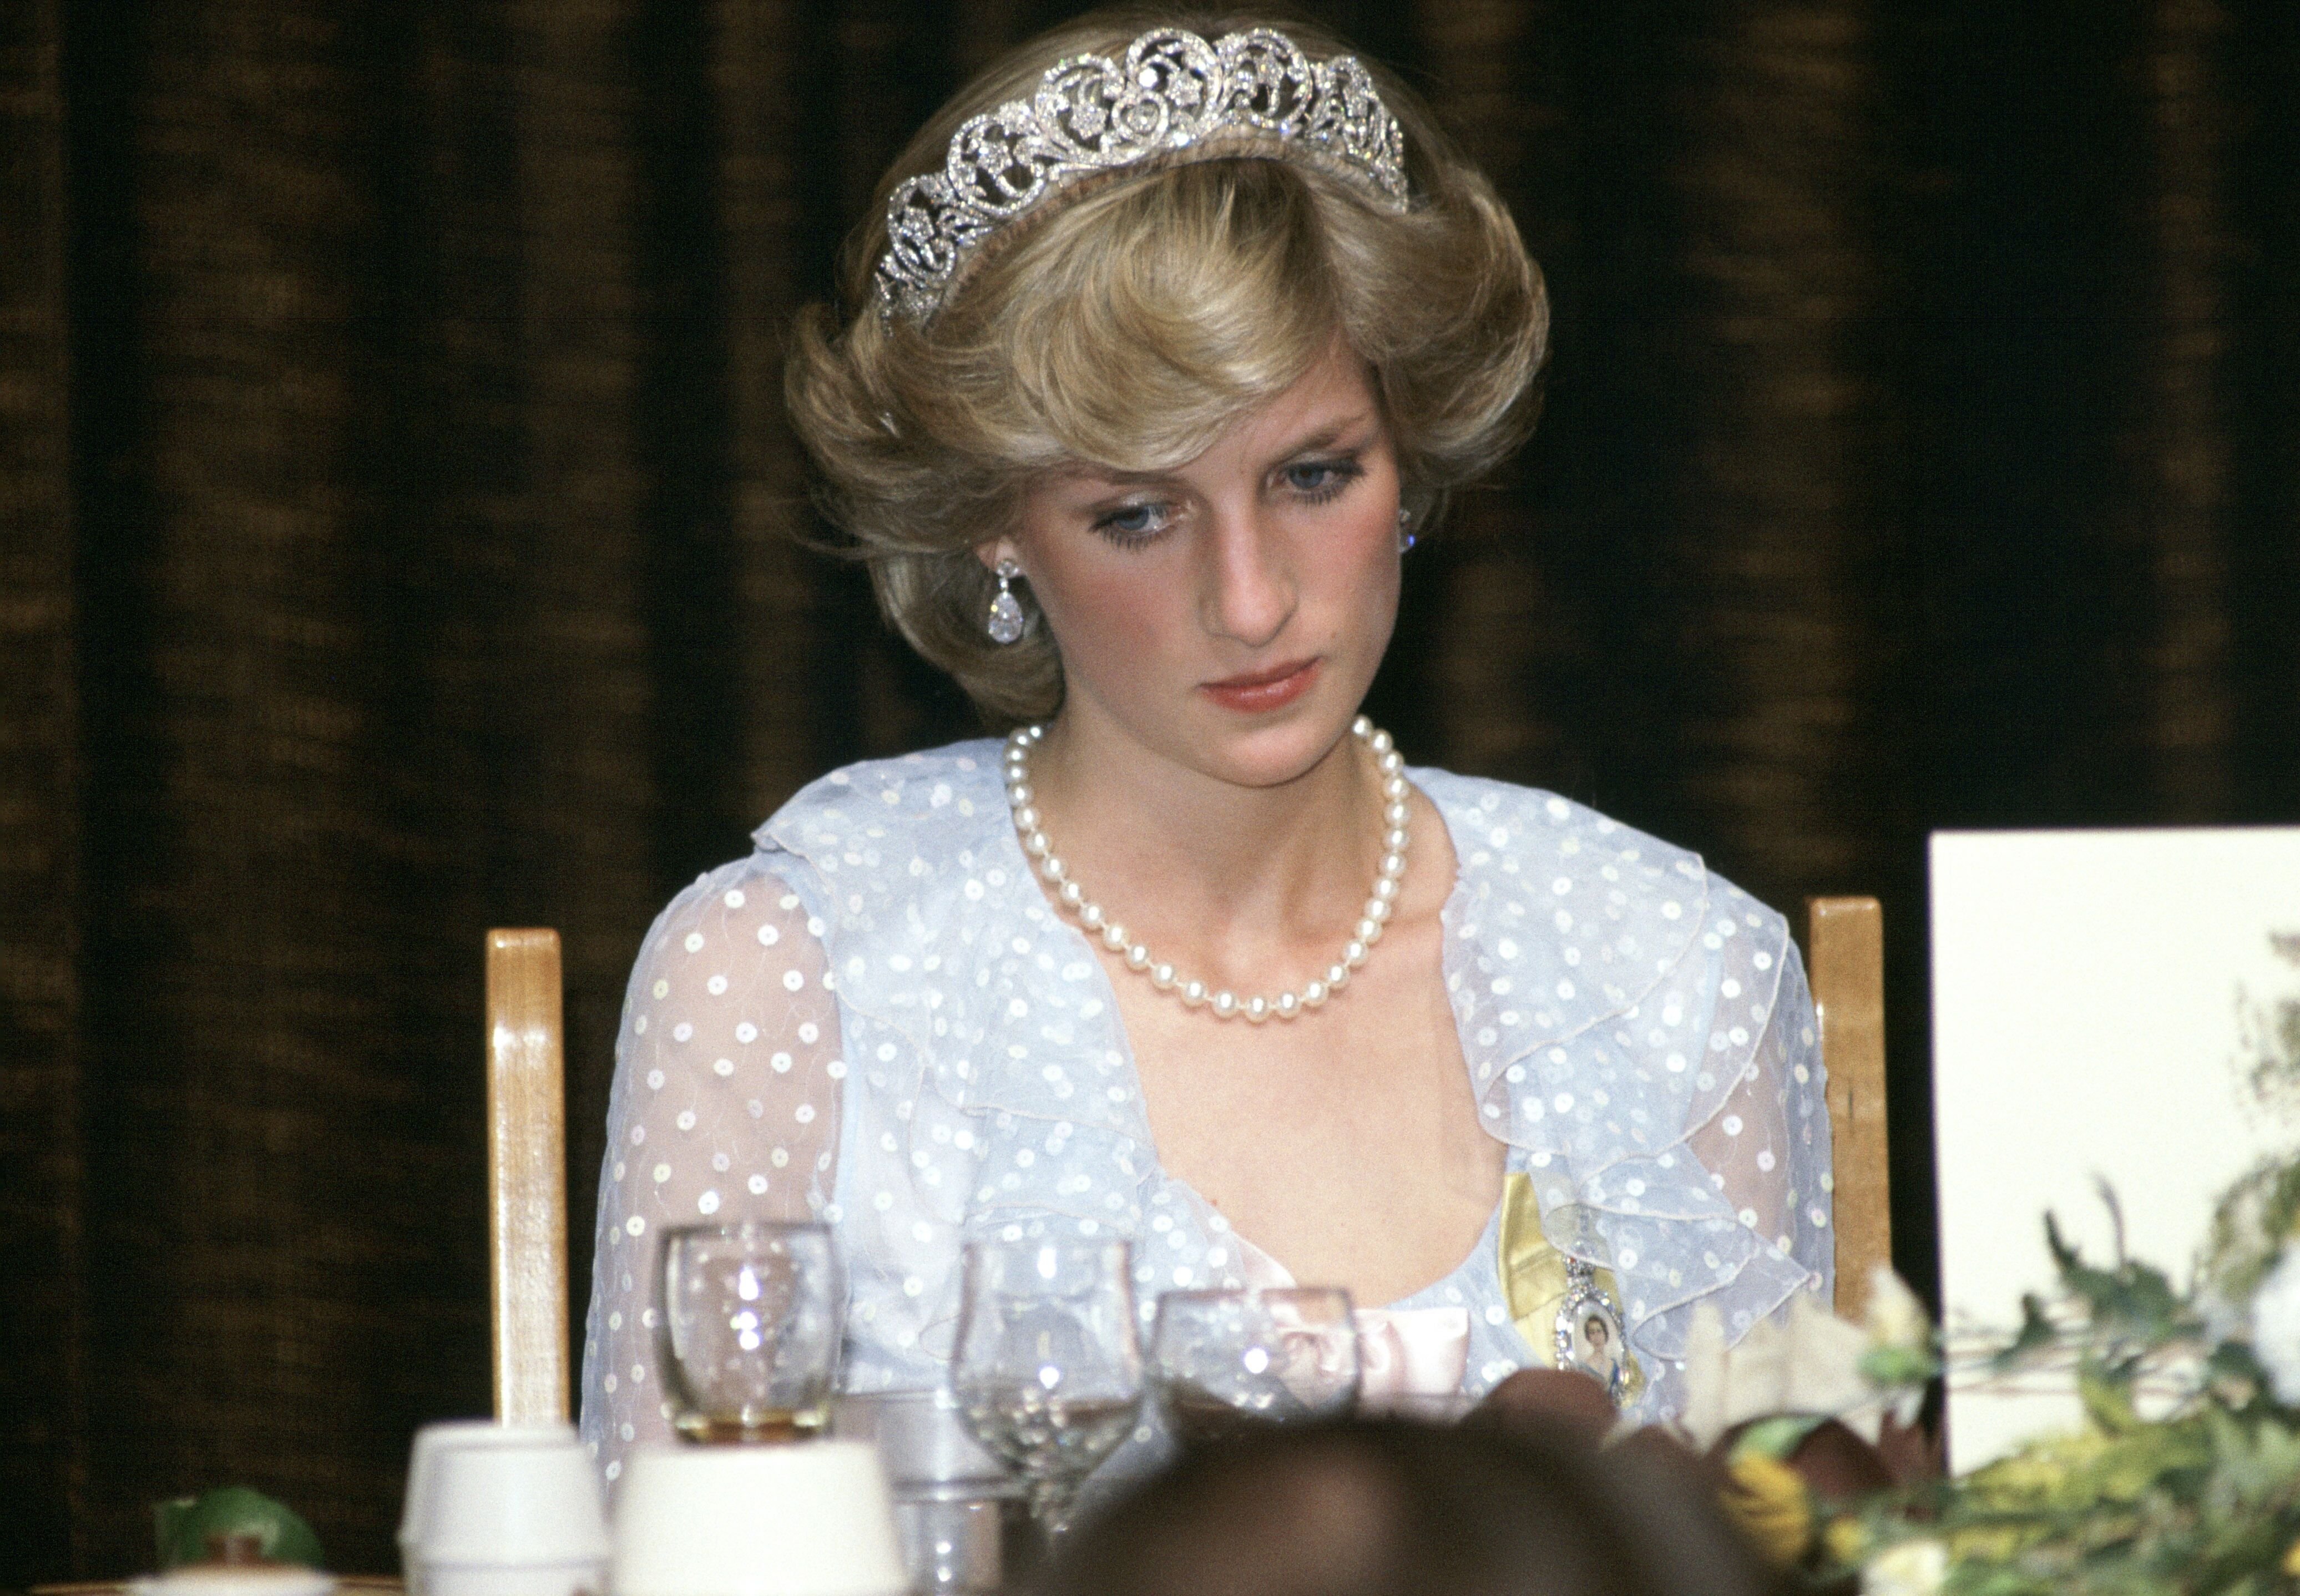 Diana Princess of Wales at a banquet in New Zealand | Source: Getty Images